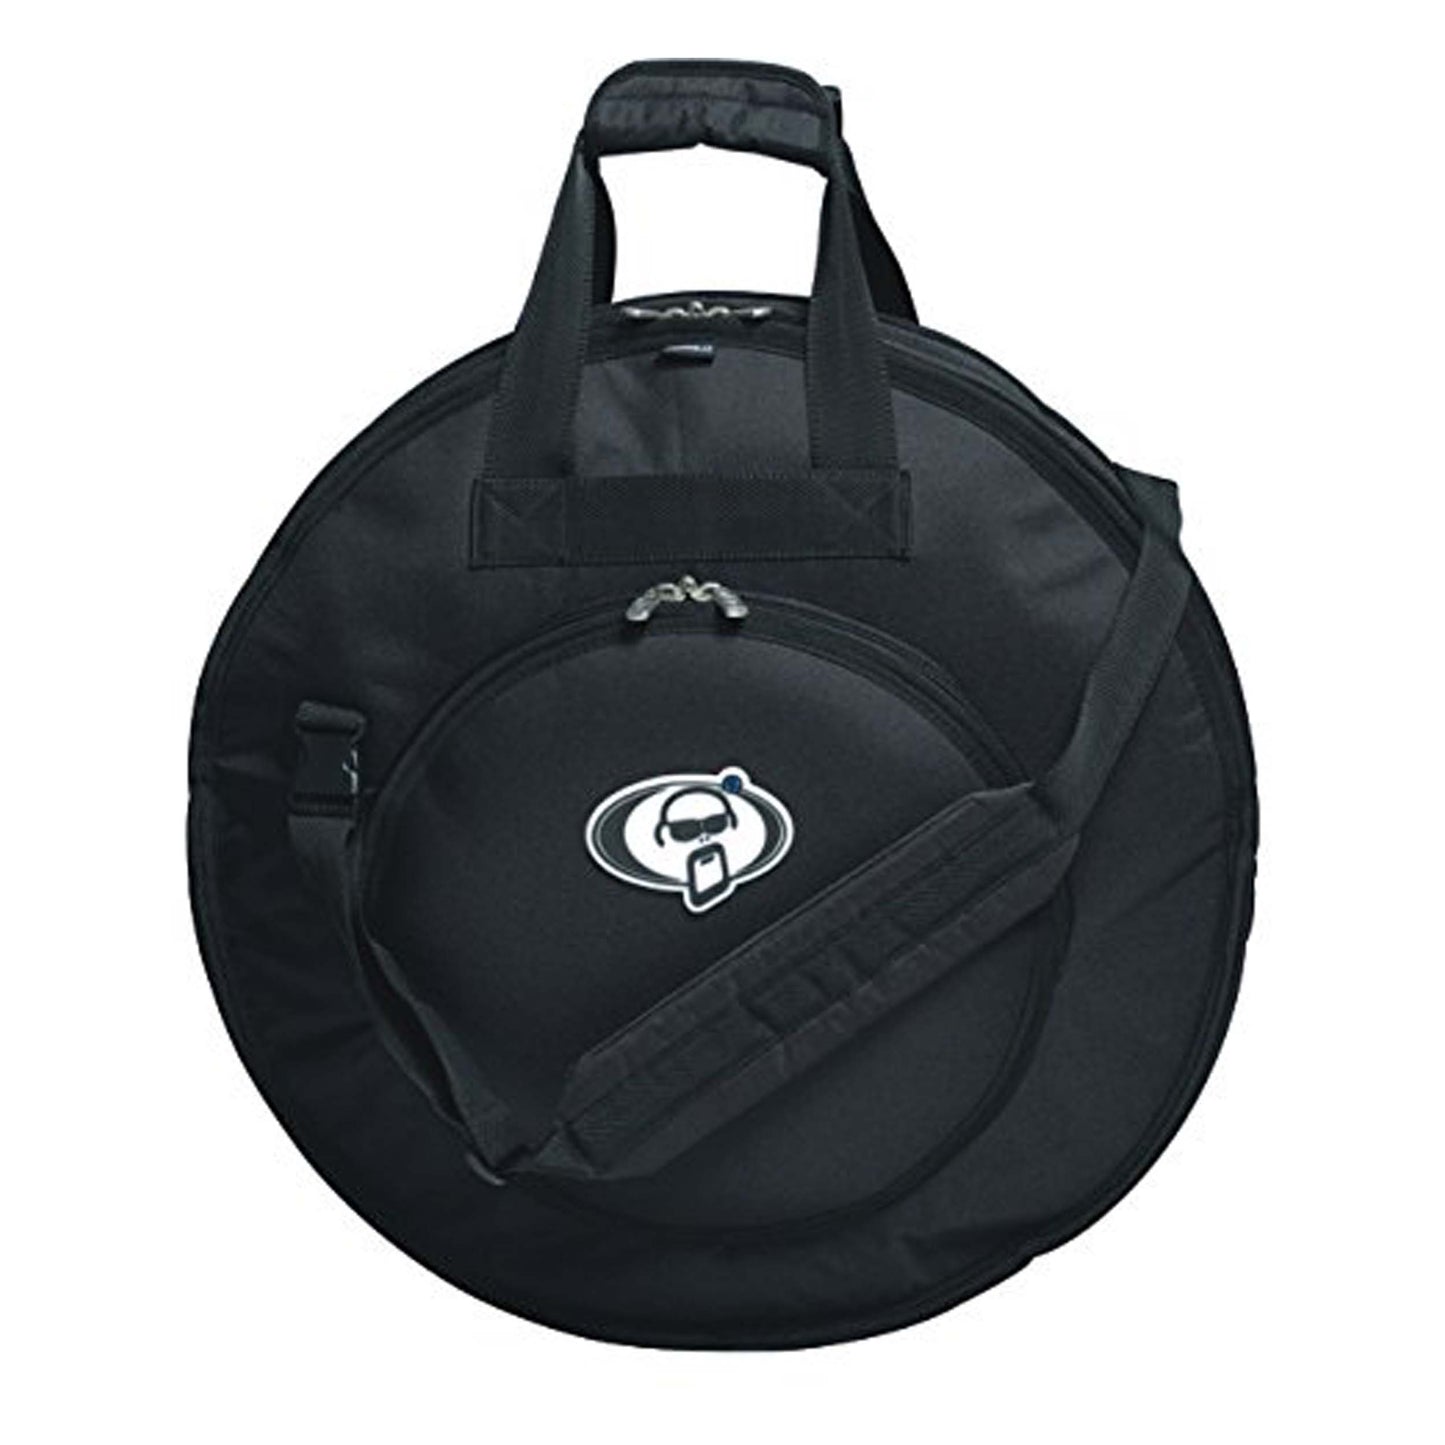 Protection Racket Deluxe Cymbal Case 24" w/ Strap - Black